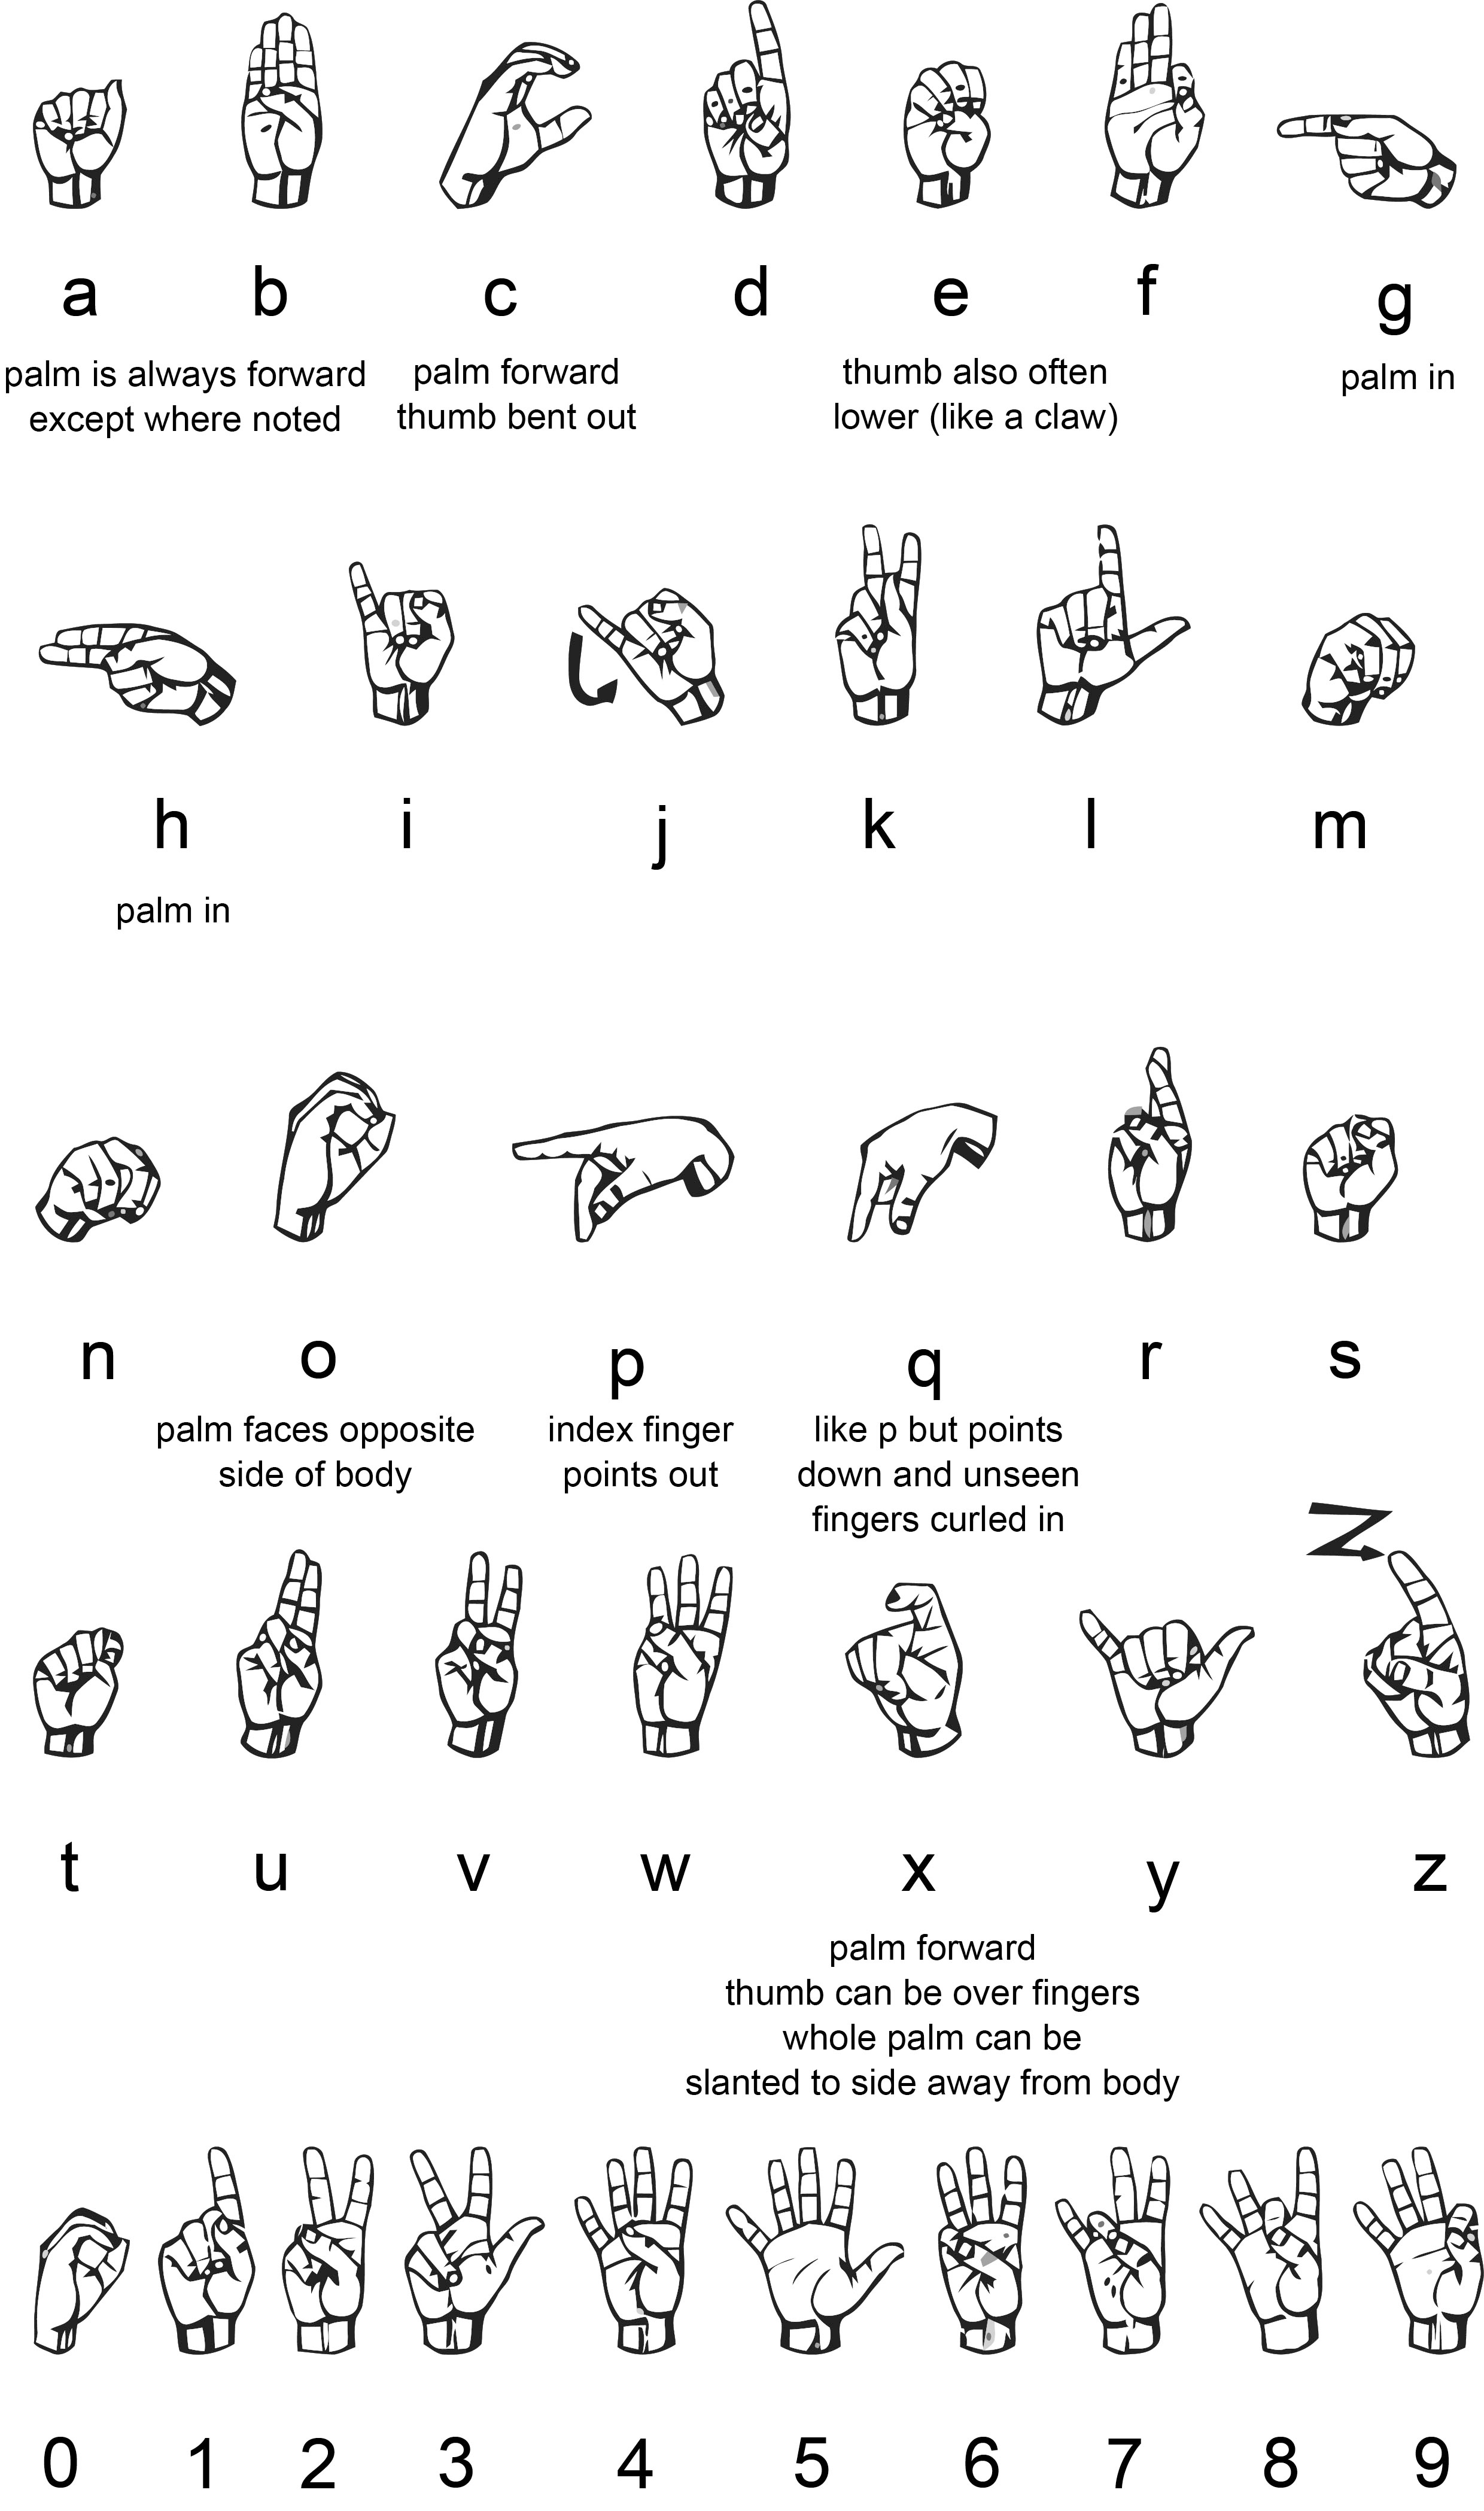 American Sign Language Fingerspelling Alphabets Image Nidcd The spanish language coincides with the english alphabet in its entirety with one additional letter, n when the spanish alphabet was updated, ch and ll were dropped from the alphabet. language fingerspelling alphabets image